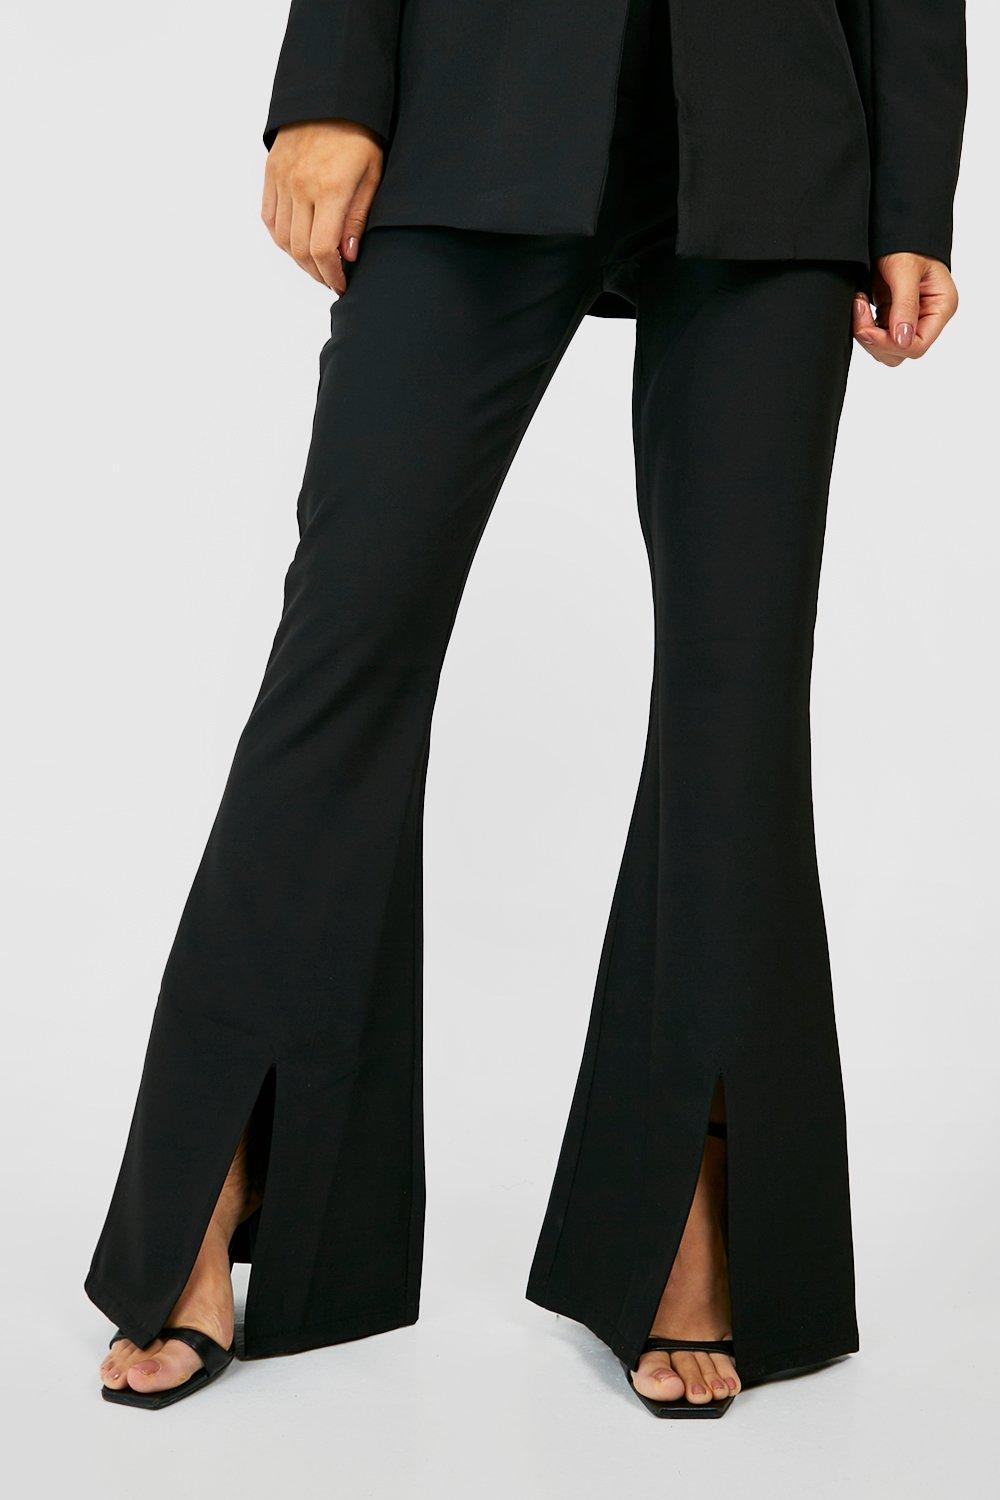 Black long elegant palazzo trousers with front split